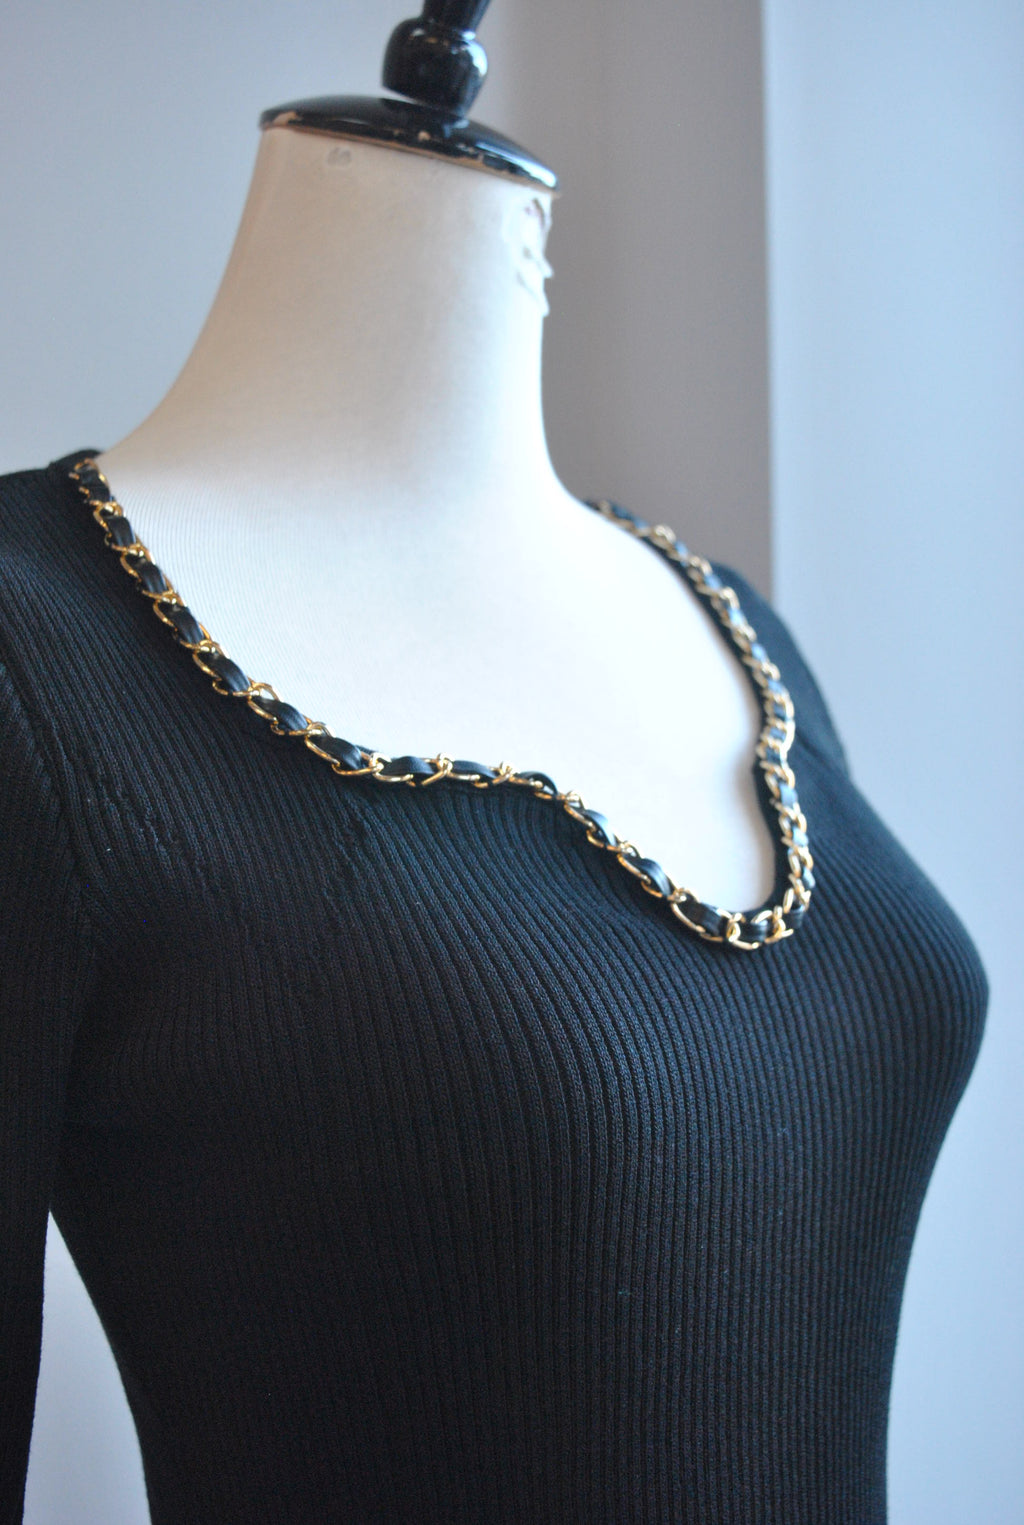 BLACK SWEATER TOP WITH GOLD CHAIN